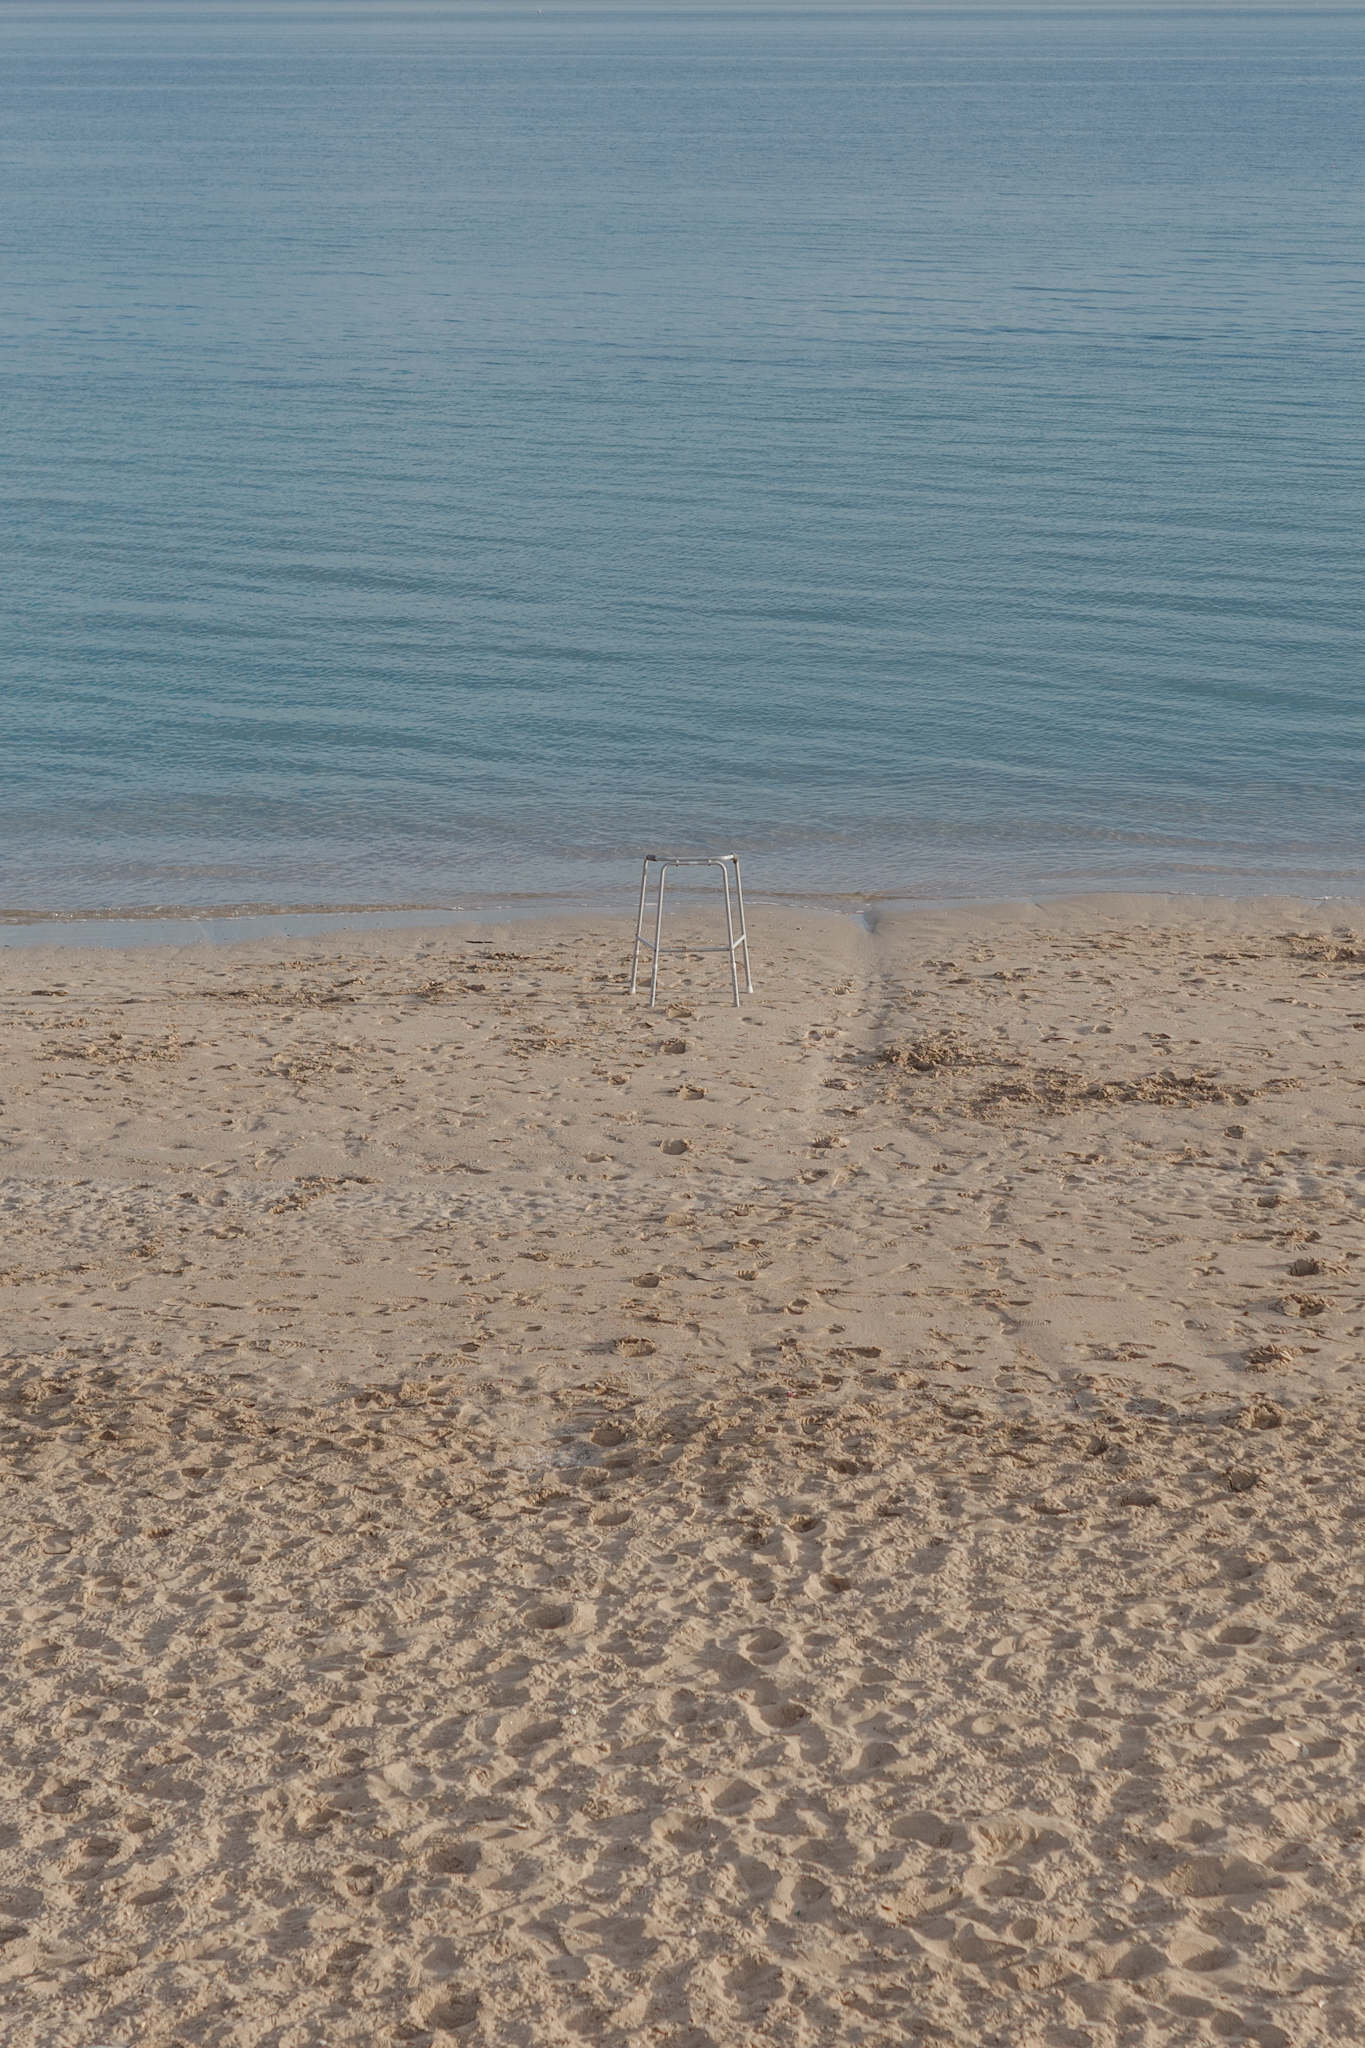 A sandy beach leading into calm blue waters with a lone metal walking frame partially submerged at the water's edge. Footprints are visible in the sand.